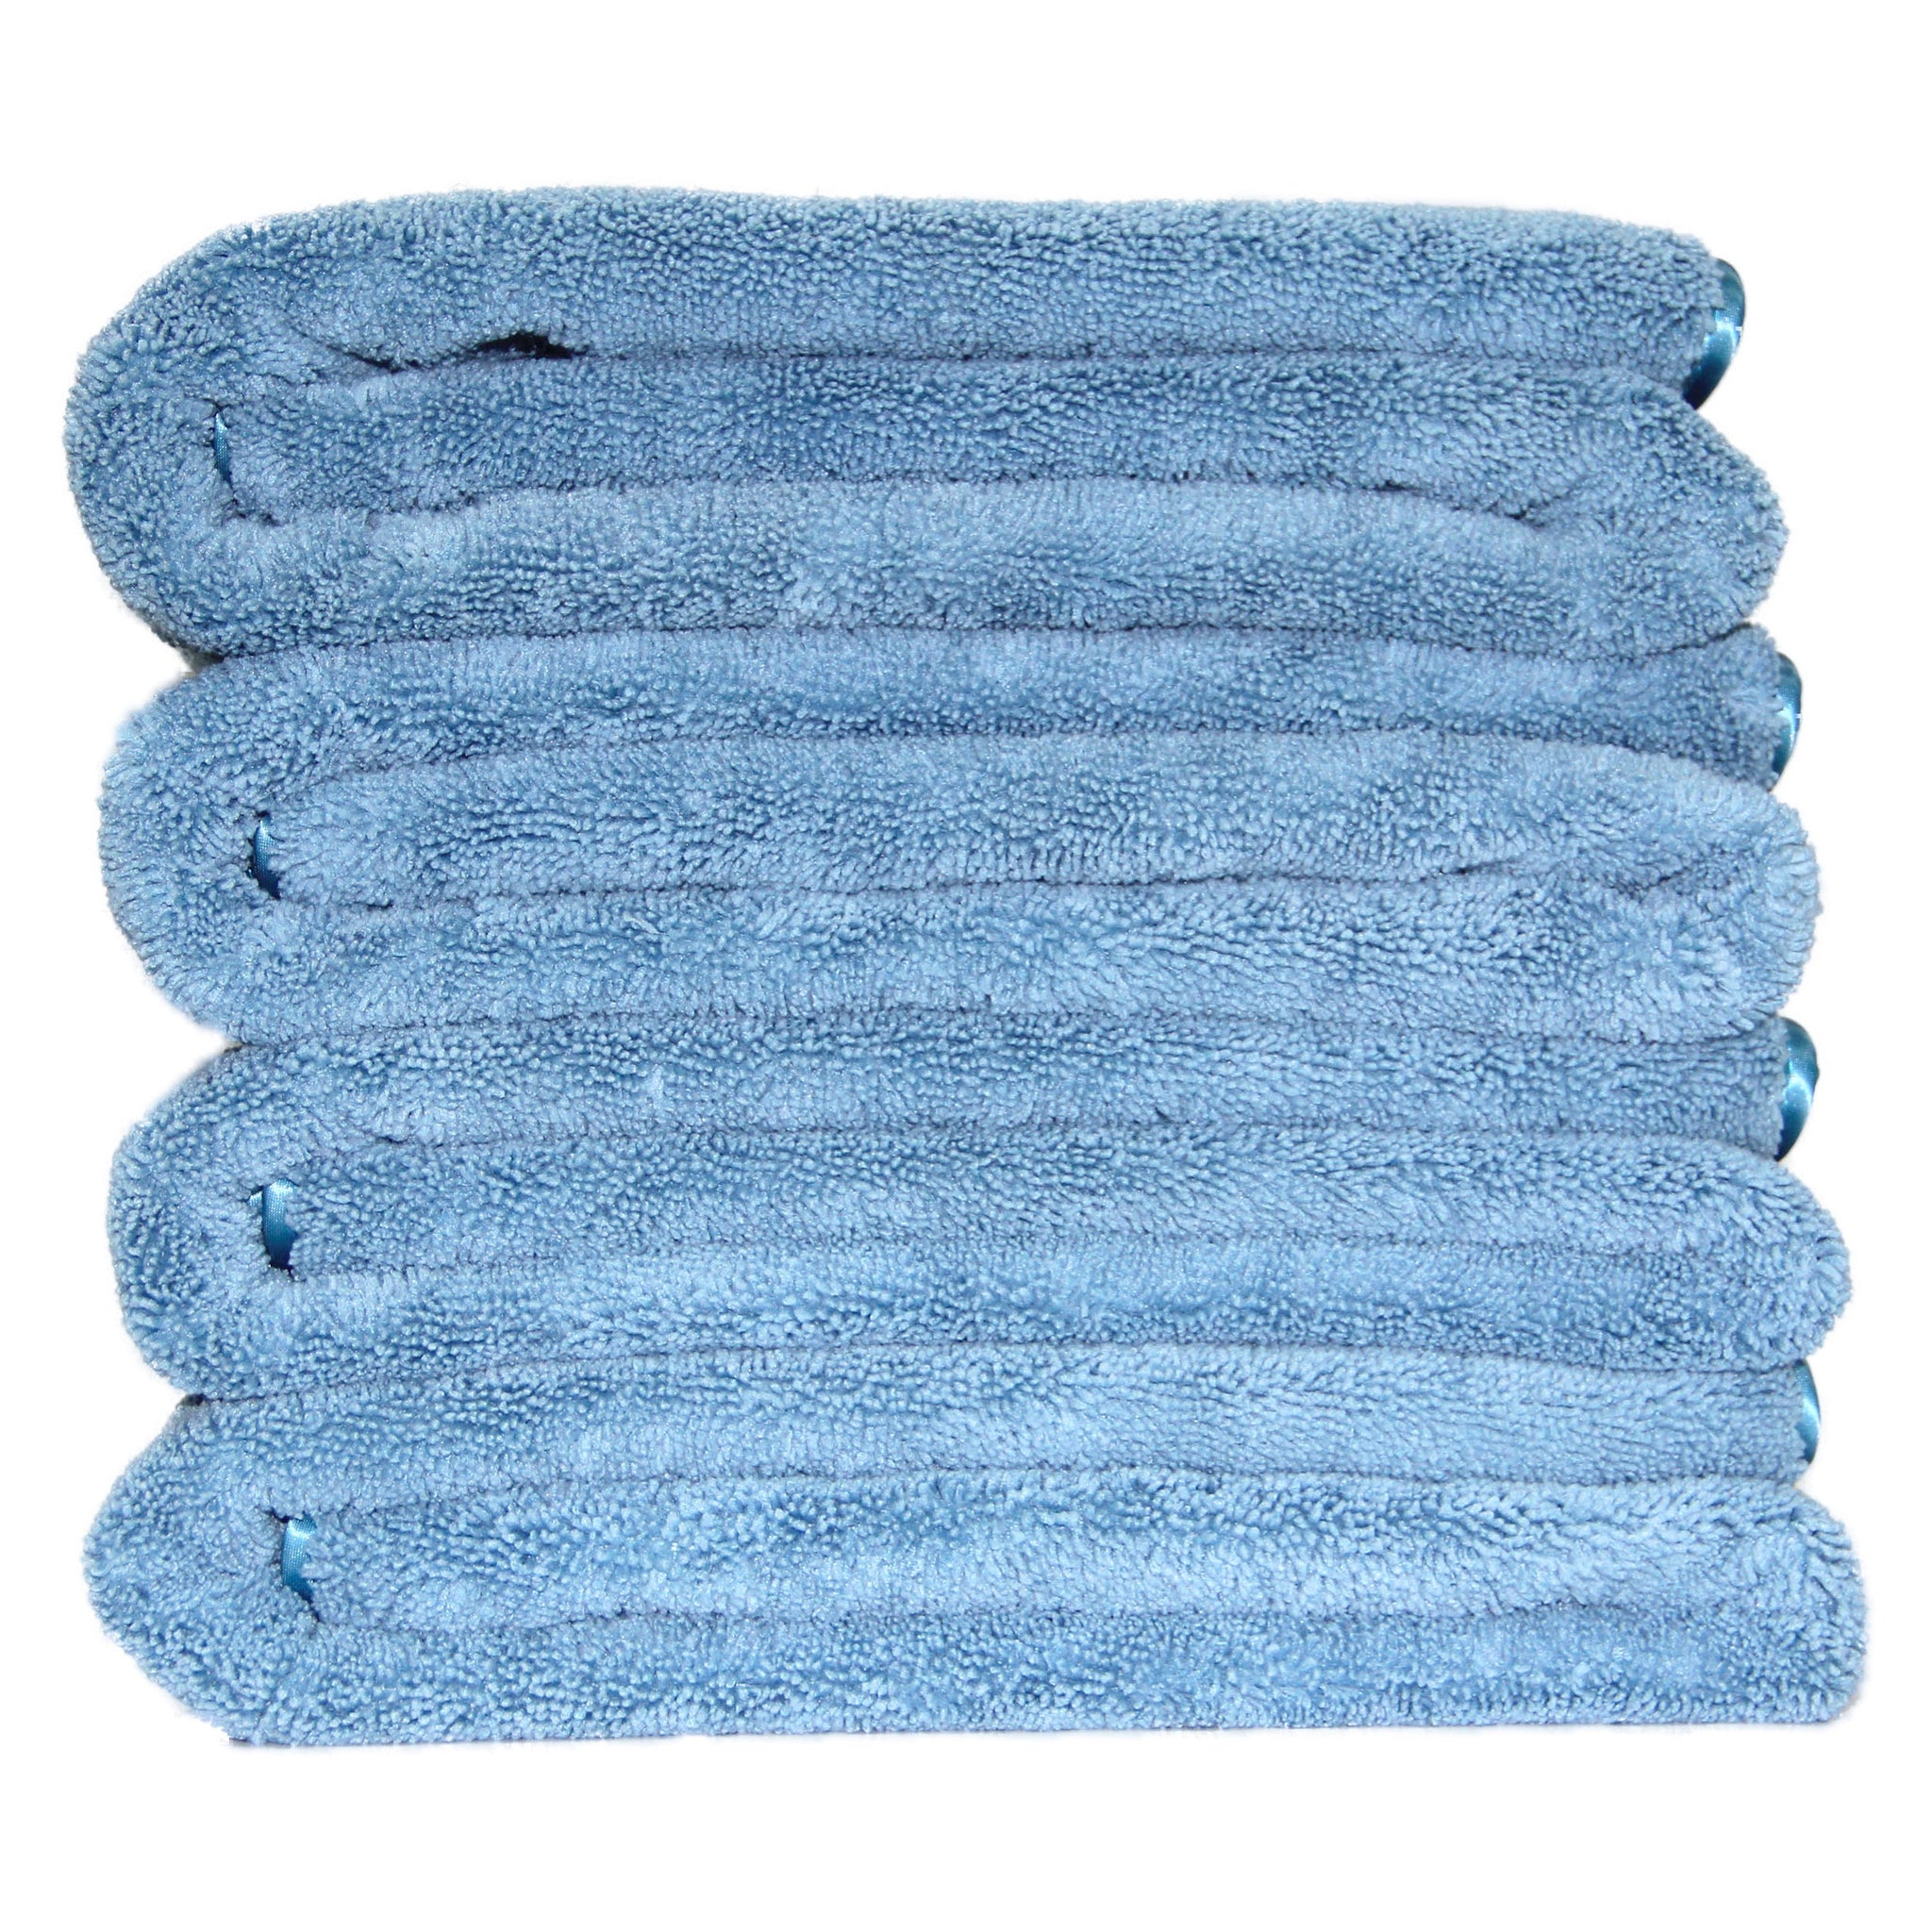 POLYTE Microfiber Quick Dry Lint Free Bath Towel 57 x 30 in Pack of 4 (Blue)